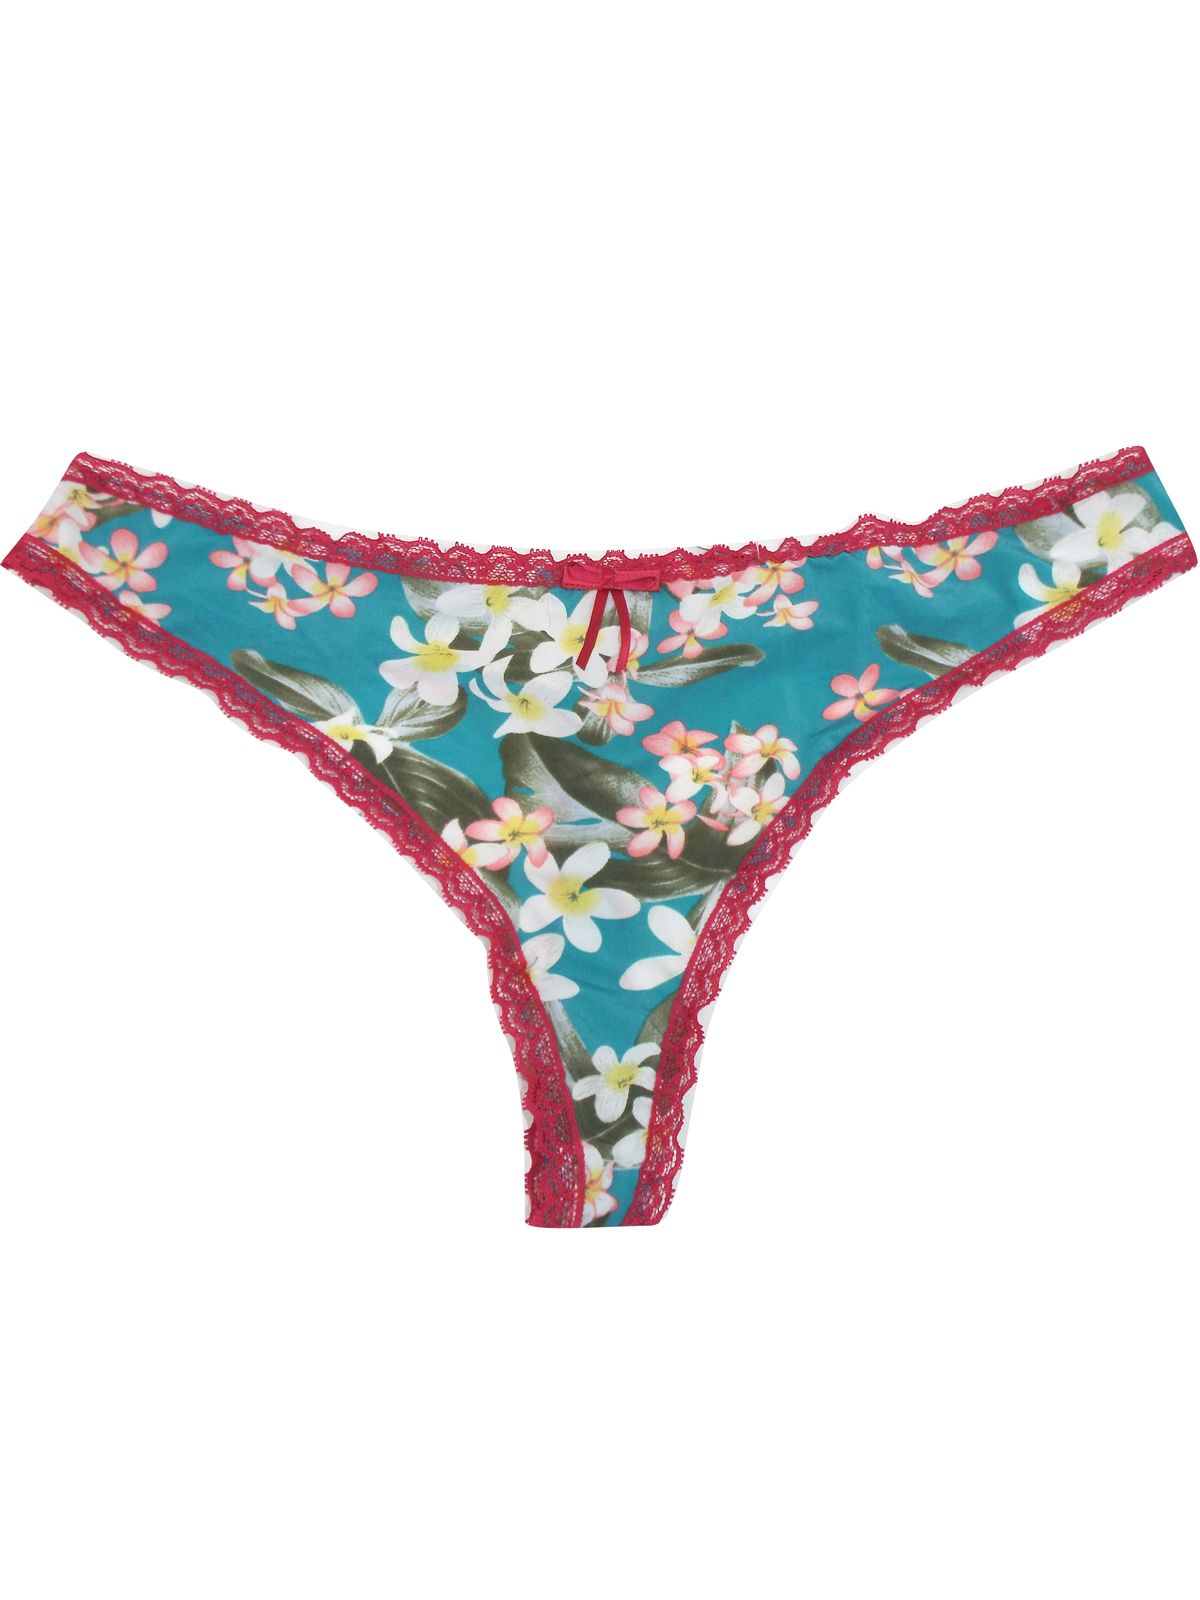 Cybele - - Cybele TEAL Oriental Floral Lace Trim Thong - Size 10 to 20